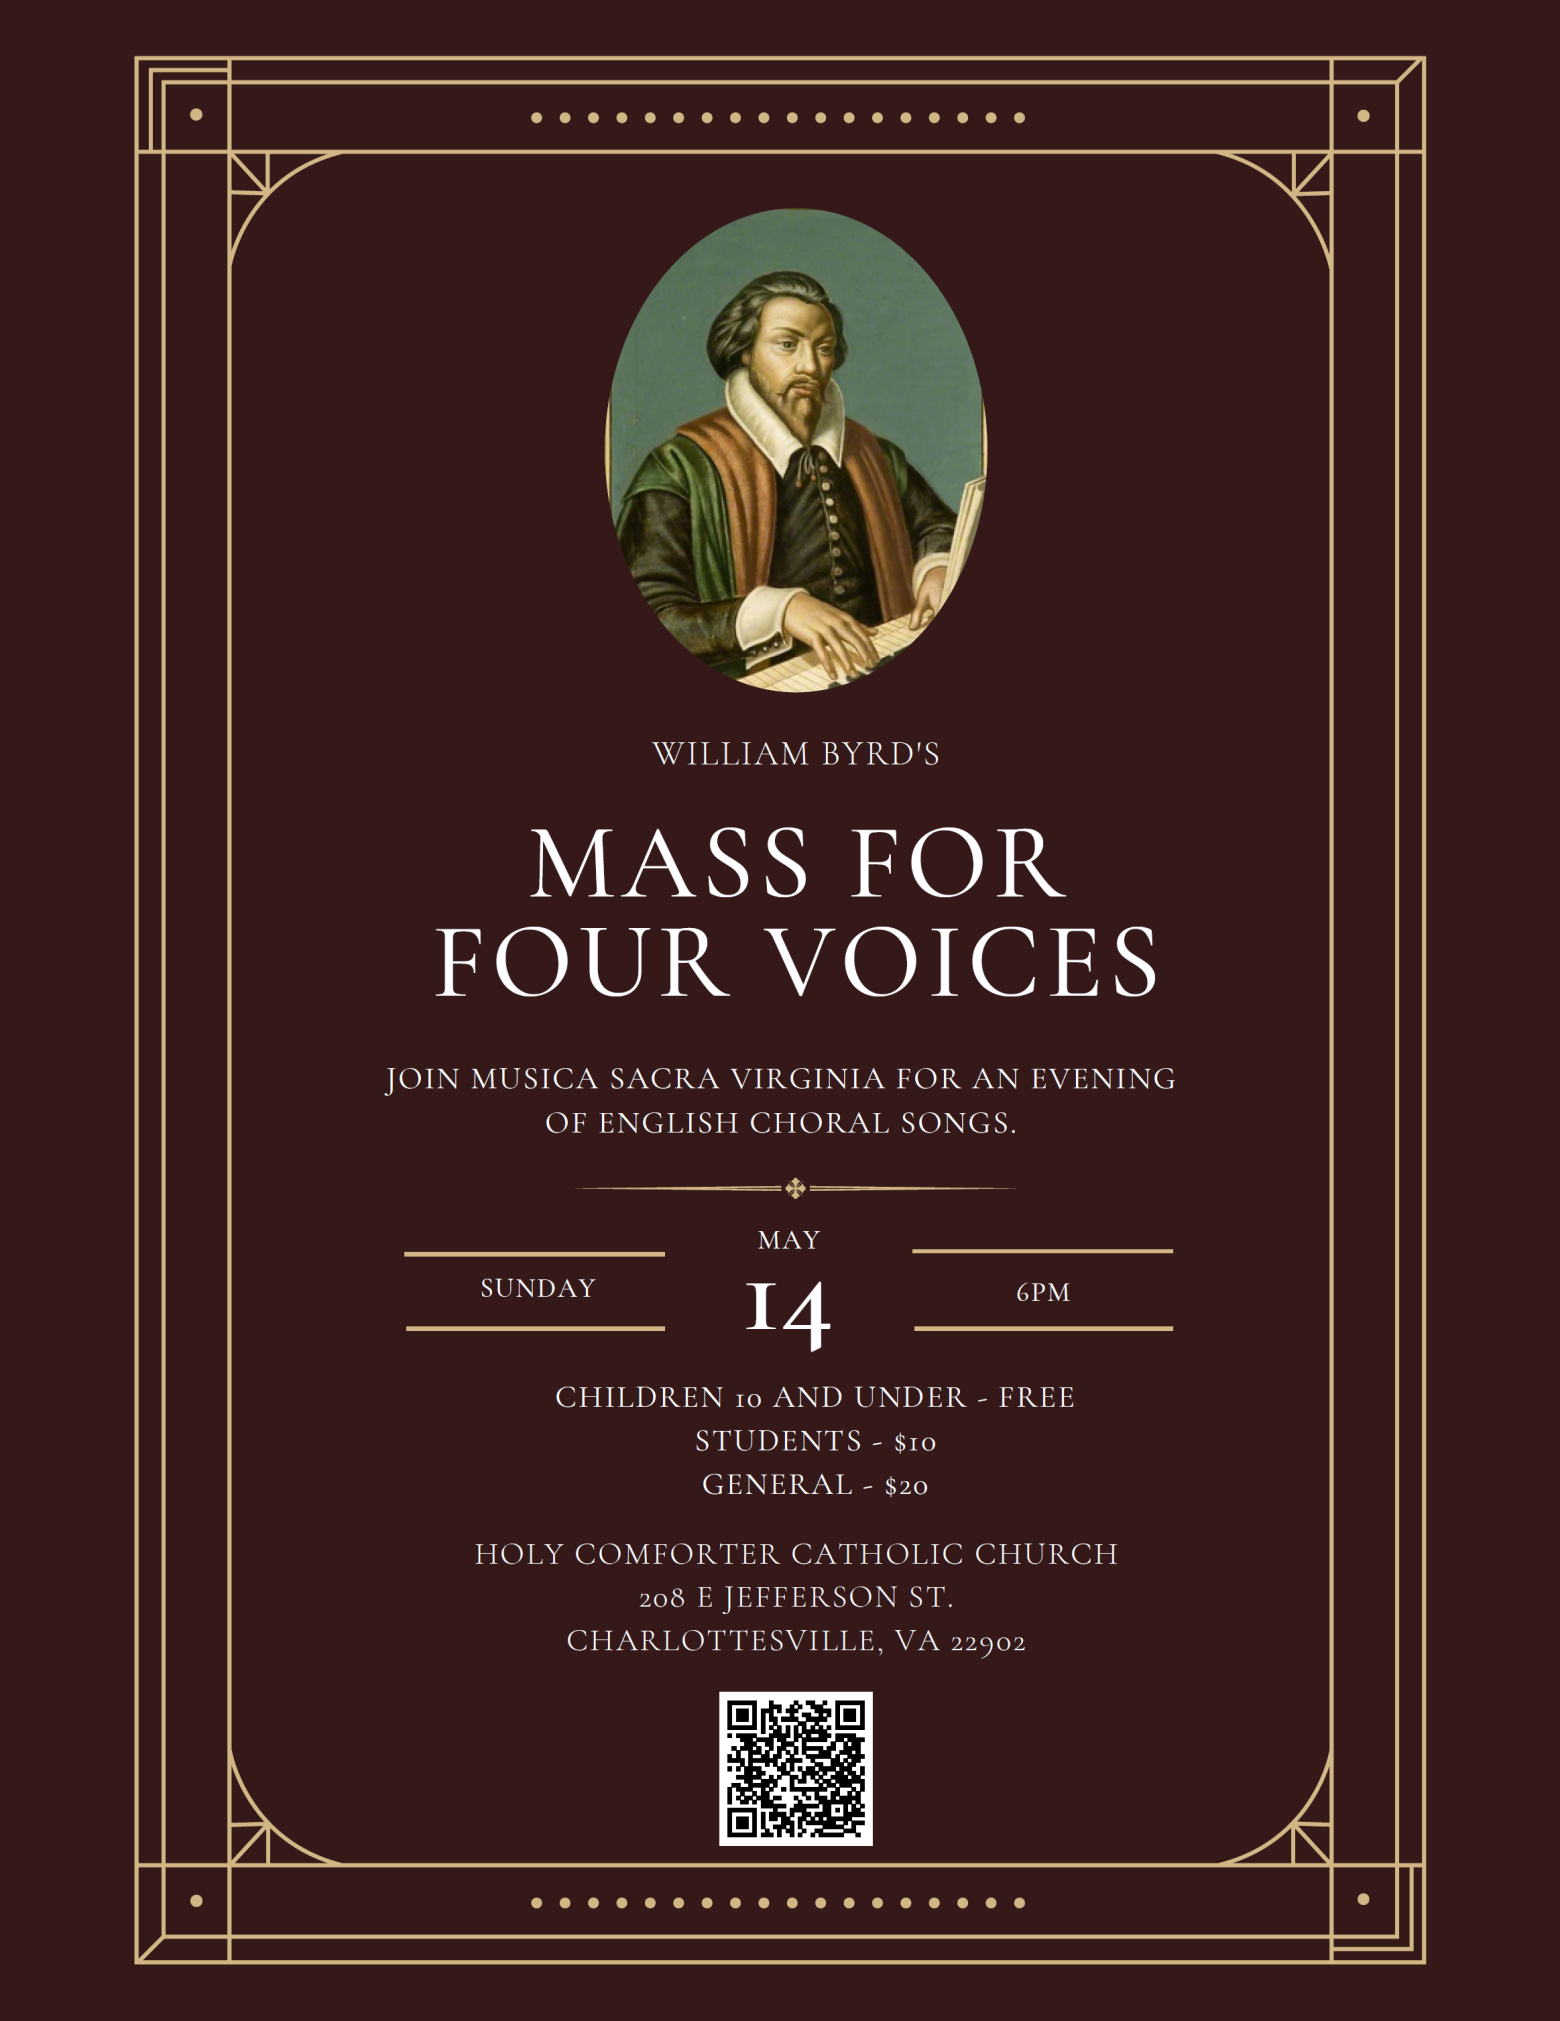 William Byrd’s Mass for Four Voices